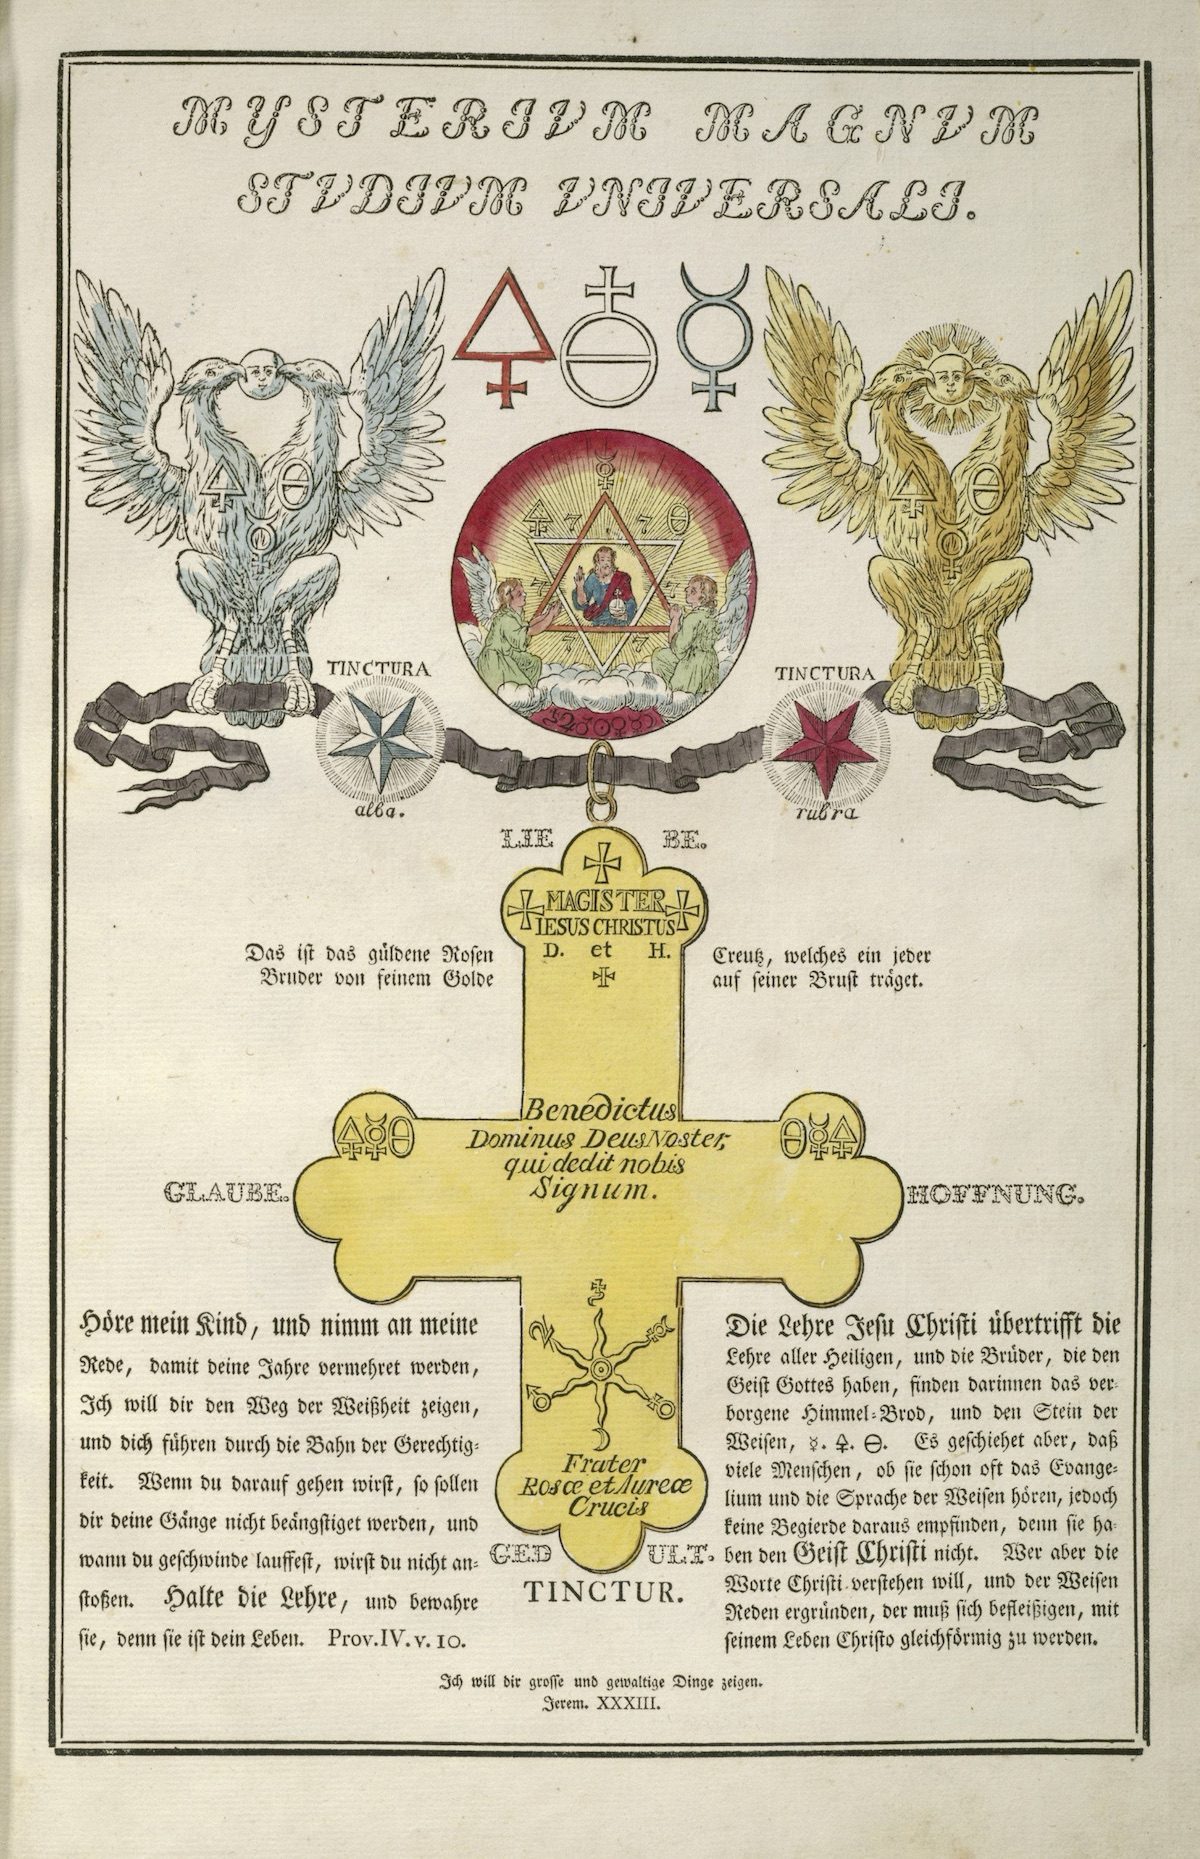 Secret Symbols of the Rosicrucians from the 16th and 17th Centuries